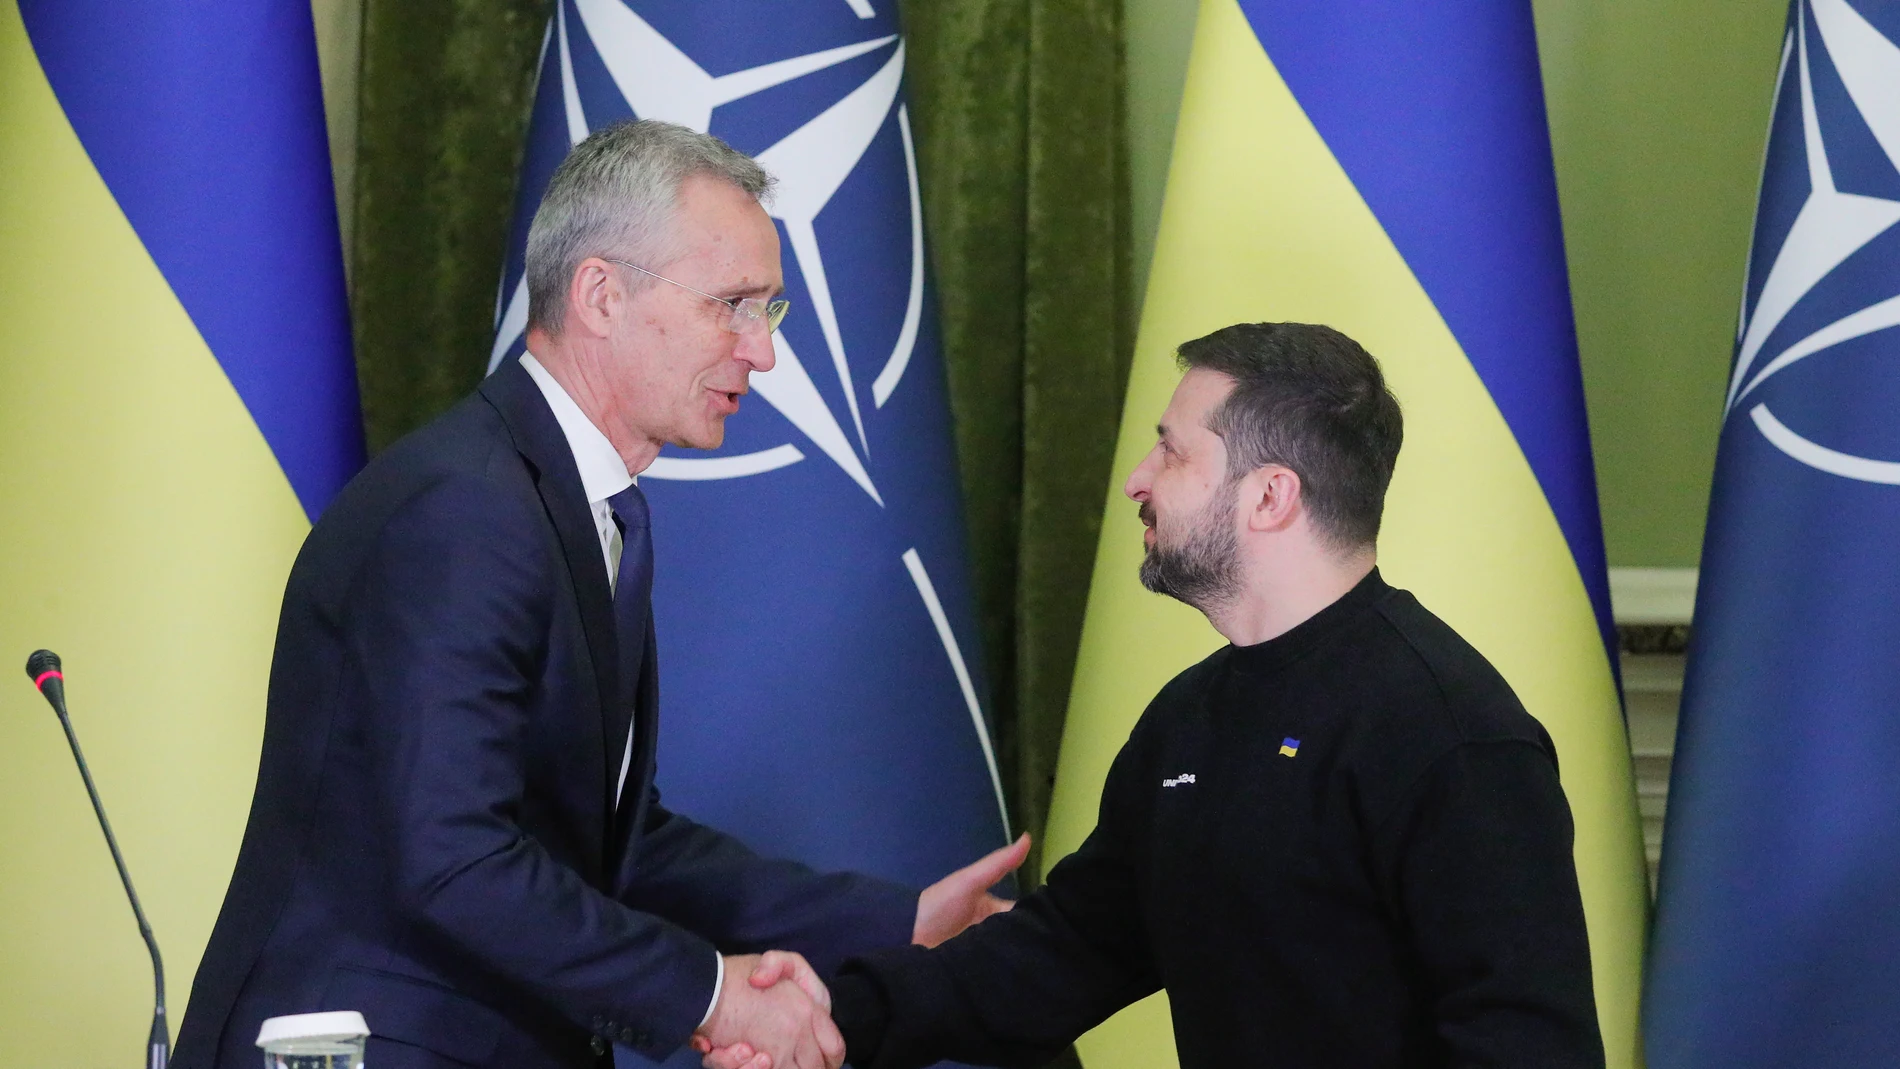 Kyiv (Ukraine), 20/04/2023.- President of Ukraine Volodymyr Zelensky (R) and NATO Secretary General Jens Stoltenberg (L) shake hands during a joint press conference following their meeting in Kyiv (Kiev), Ukraine, 20 April 2023. Stoltenberg's visit to Kyiv was not announced. It is the first time the NATO chief visits Ukraine since Russia began its full-scale invasion of the country in February 2022. (Rusia, Ucrania) EFE/EPA/SERGEY DOLZHENKO
